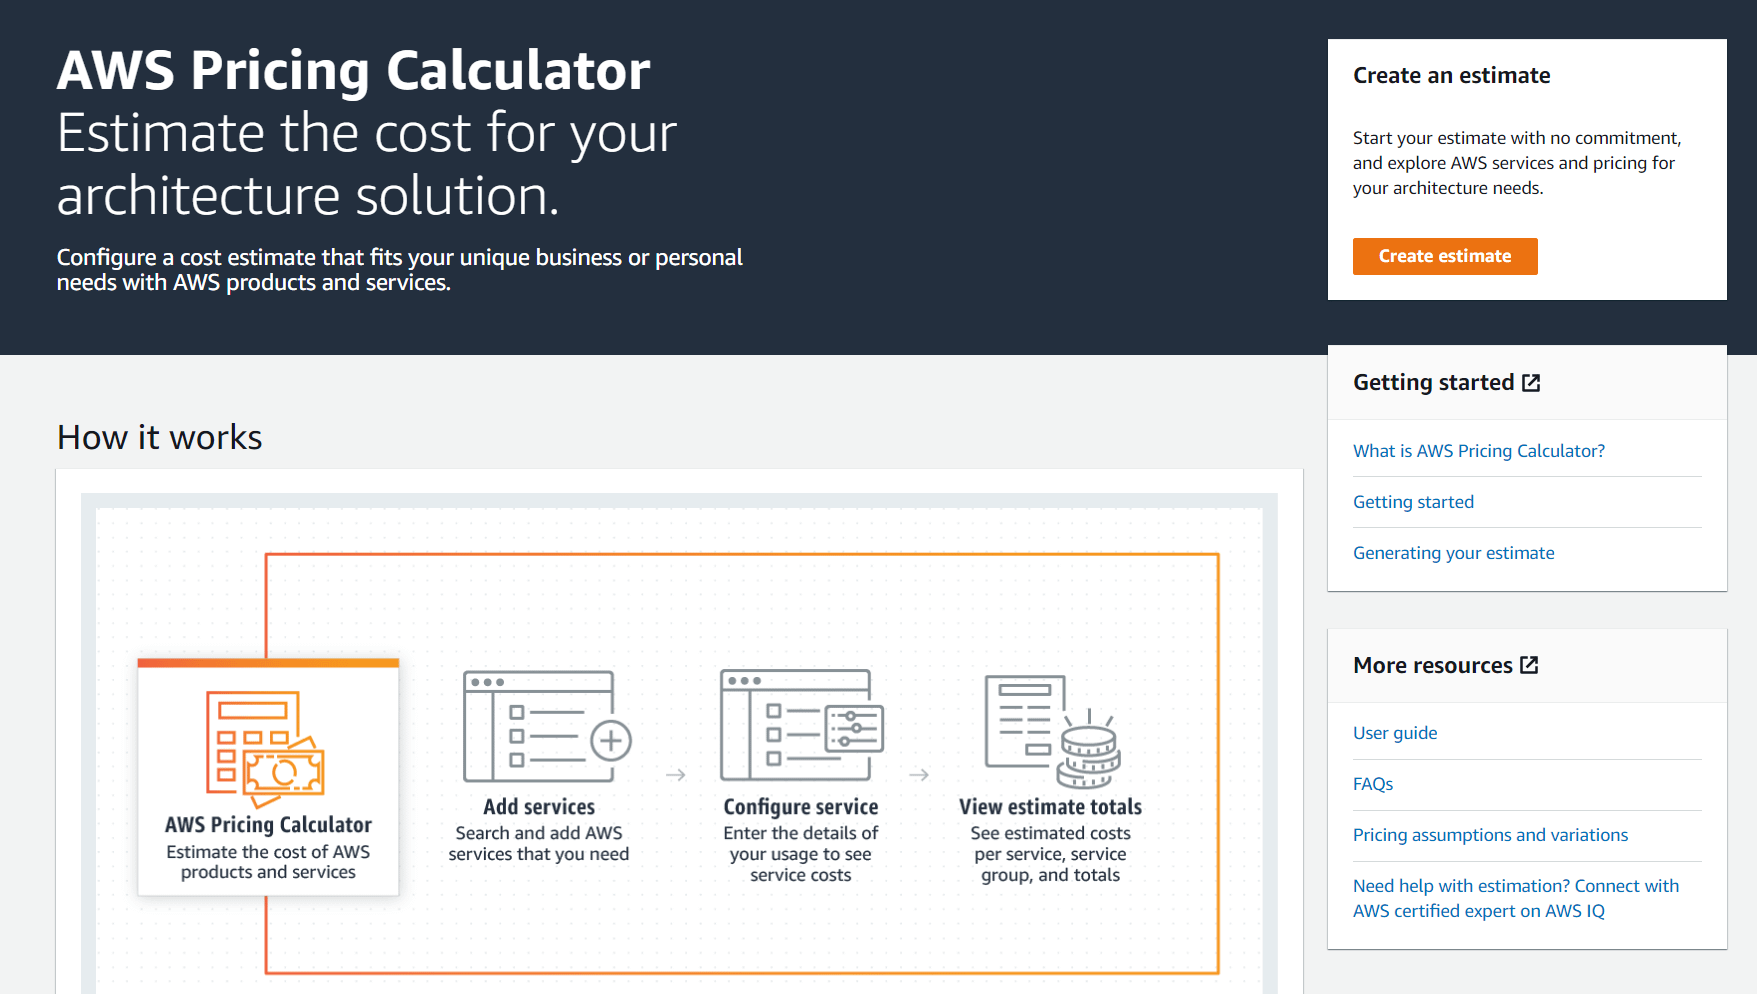 The AWS pricing calculator